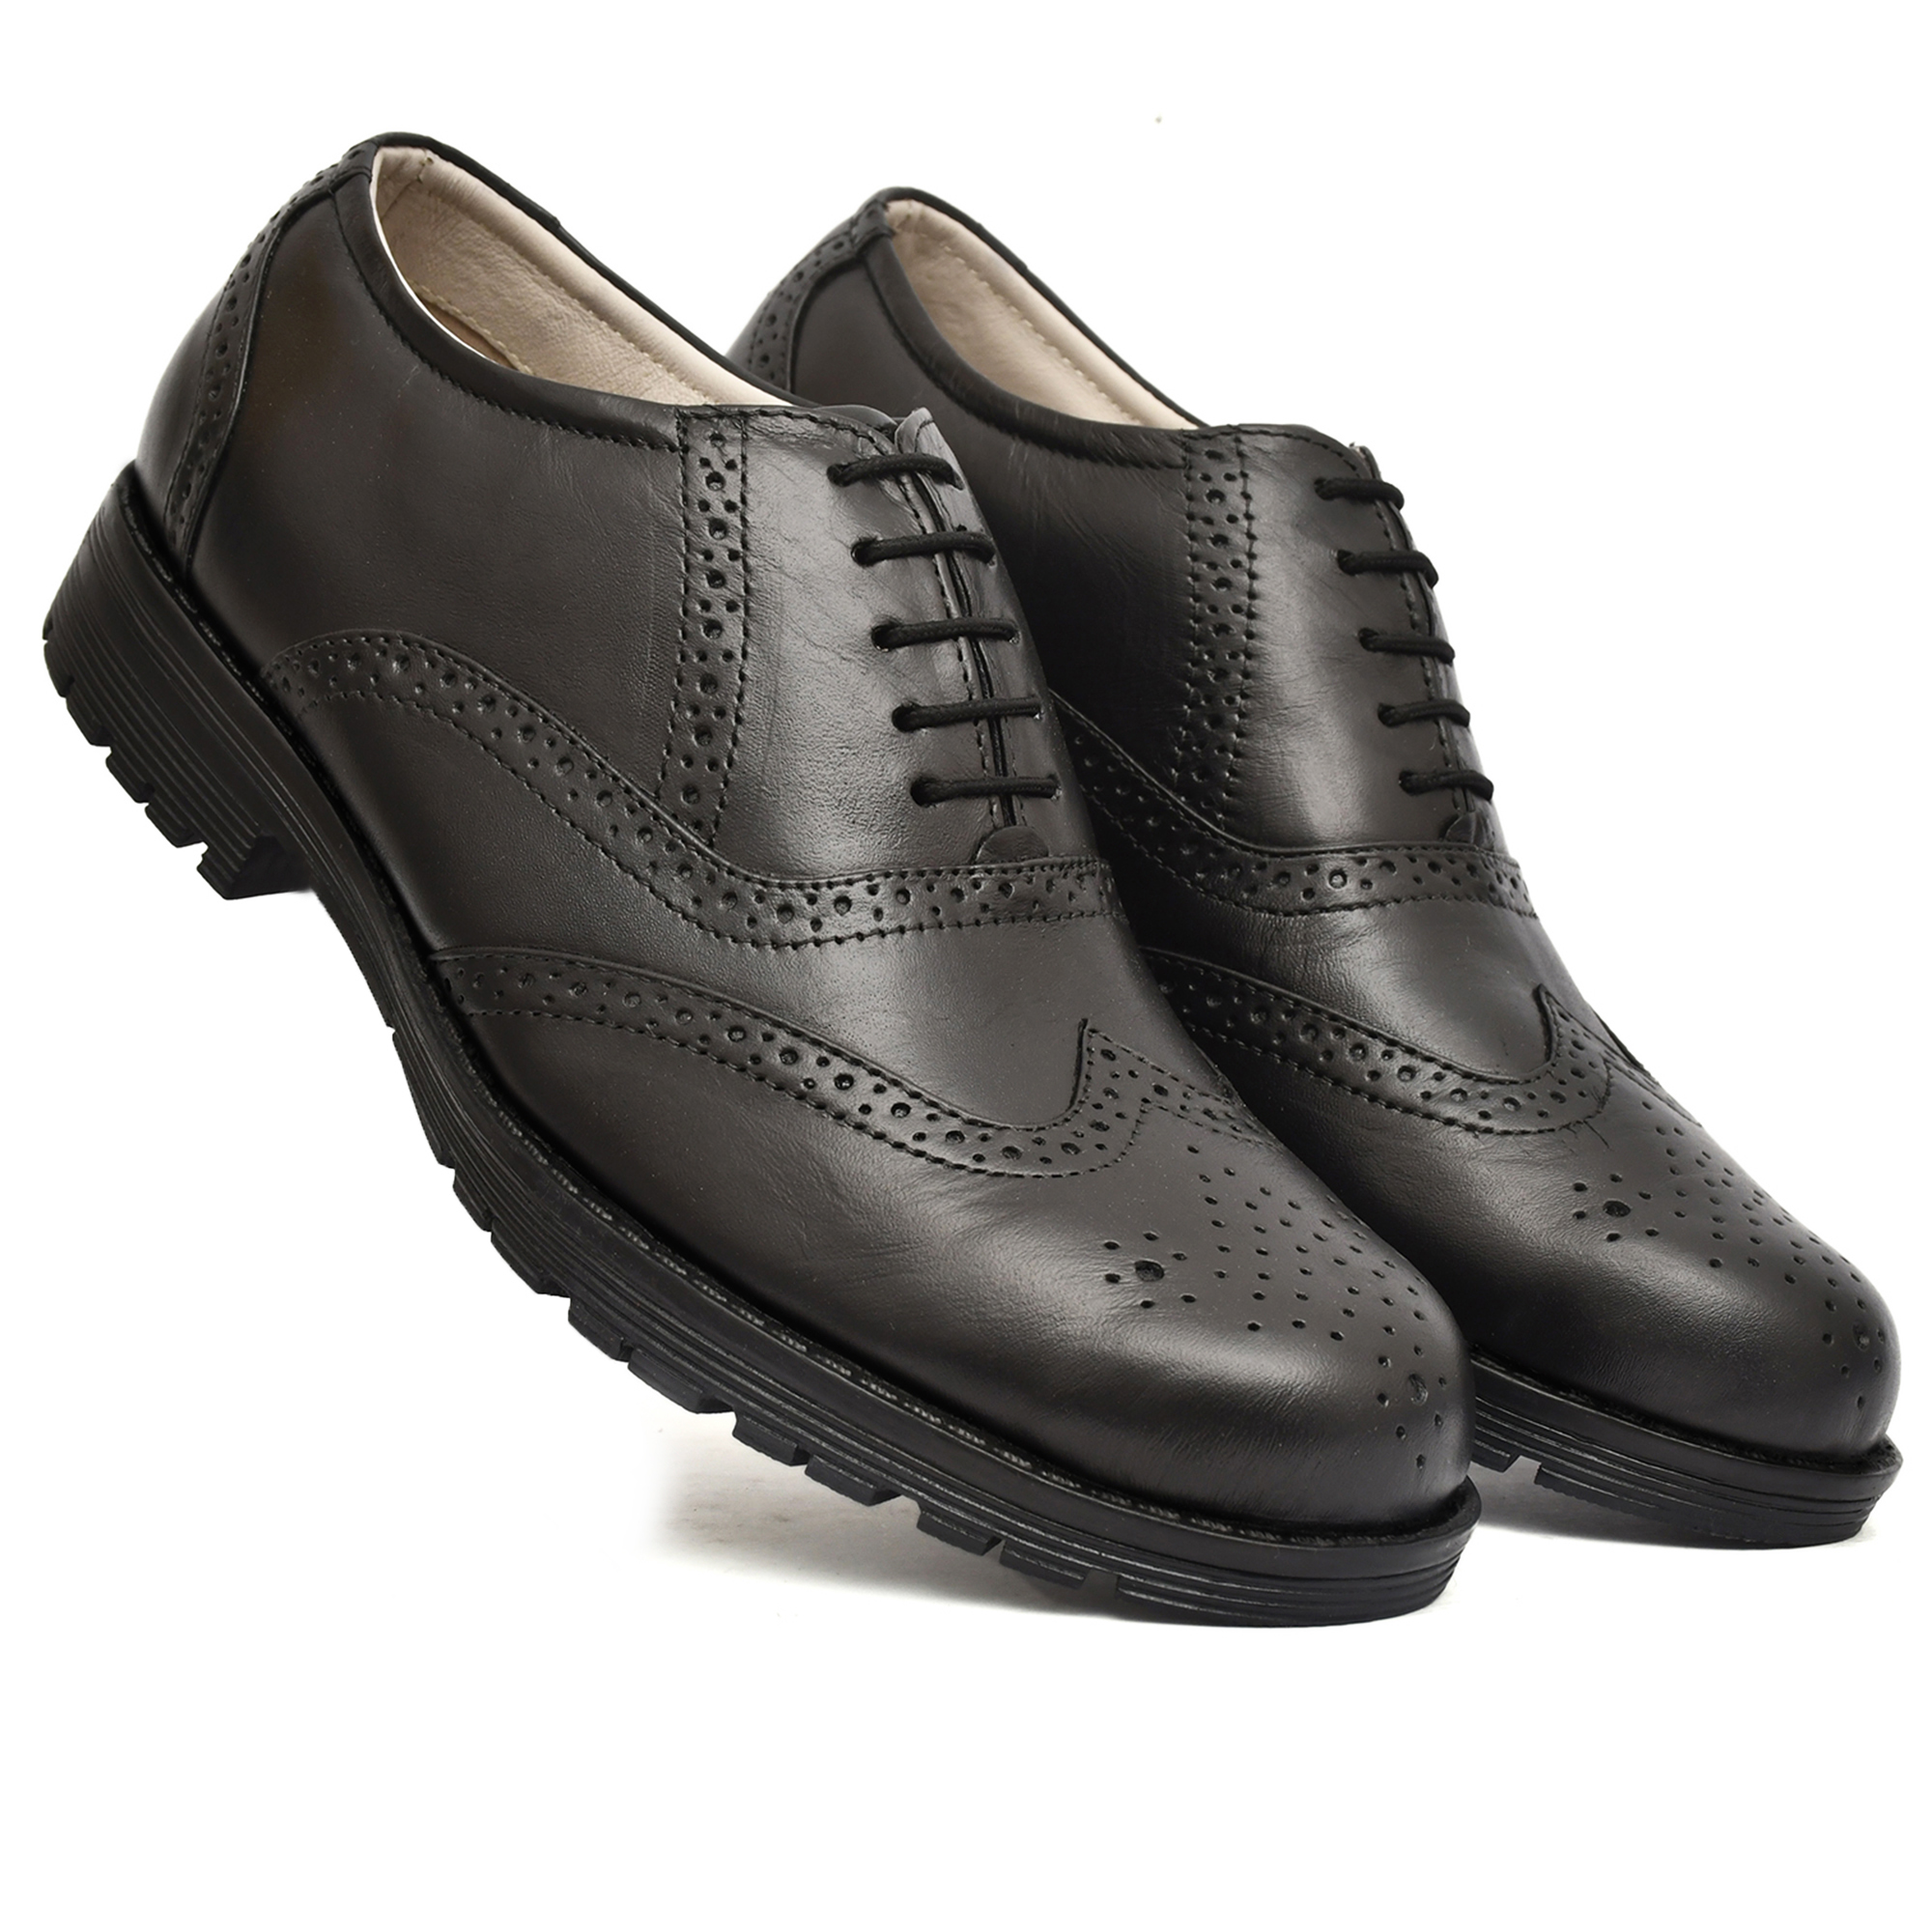 Safety Shoes : Buy Safety Formal Brogue Leather Shoes online at best prices @ factory prices in India. Article: S101-Black